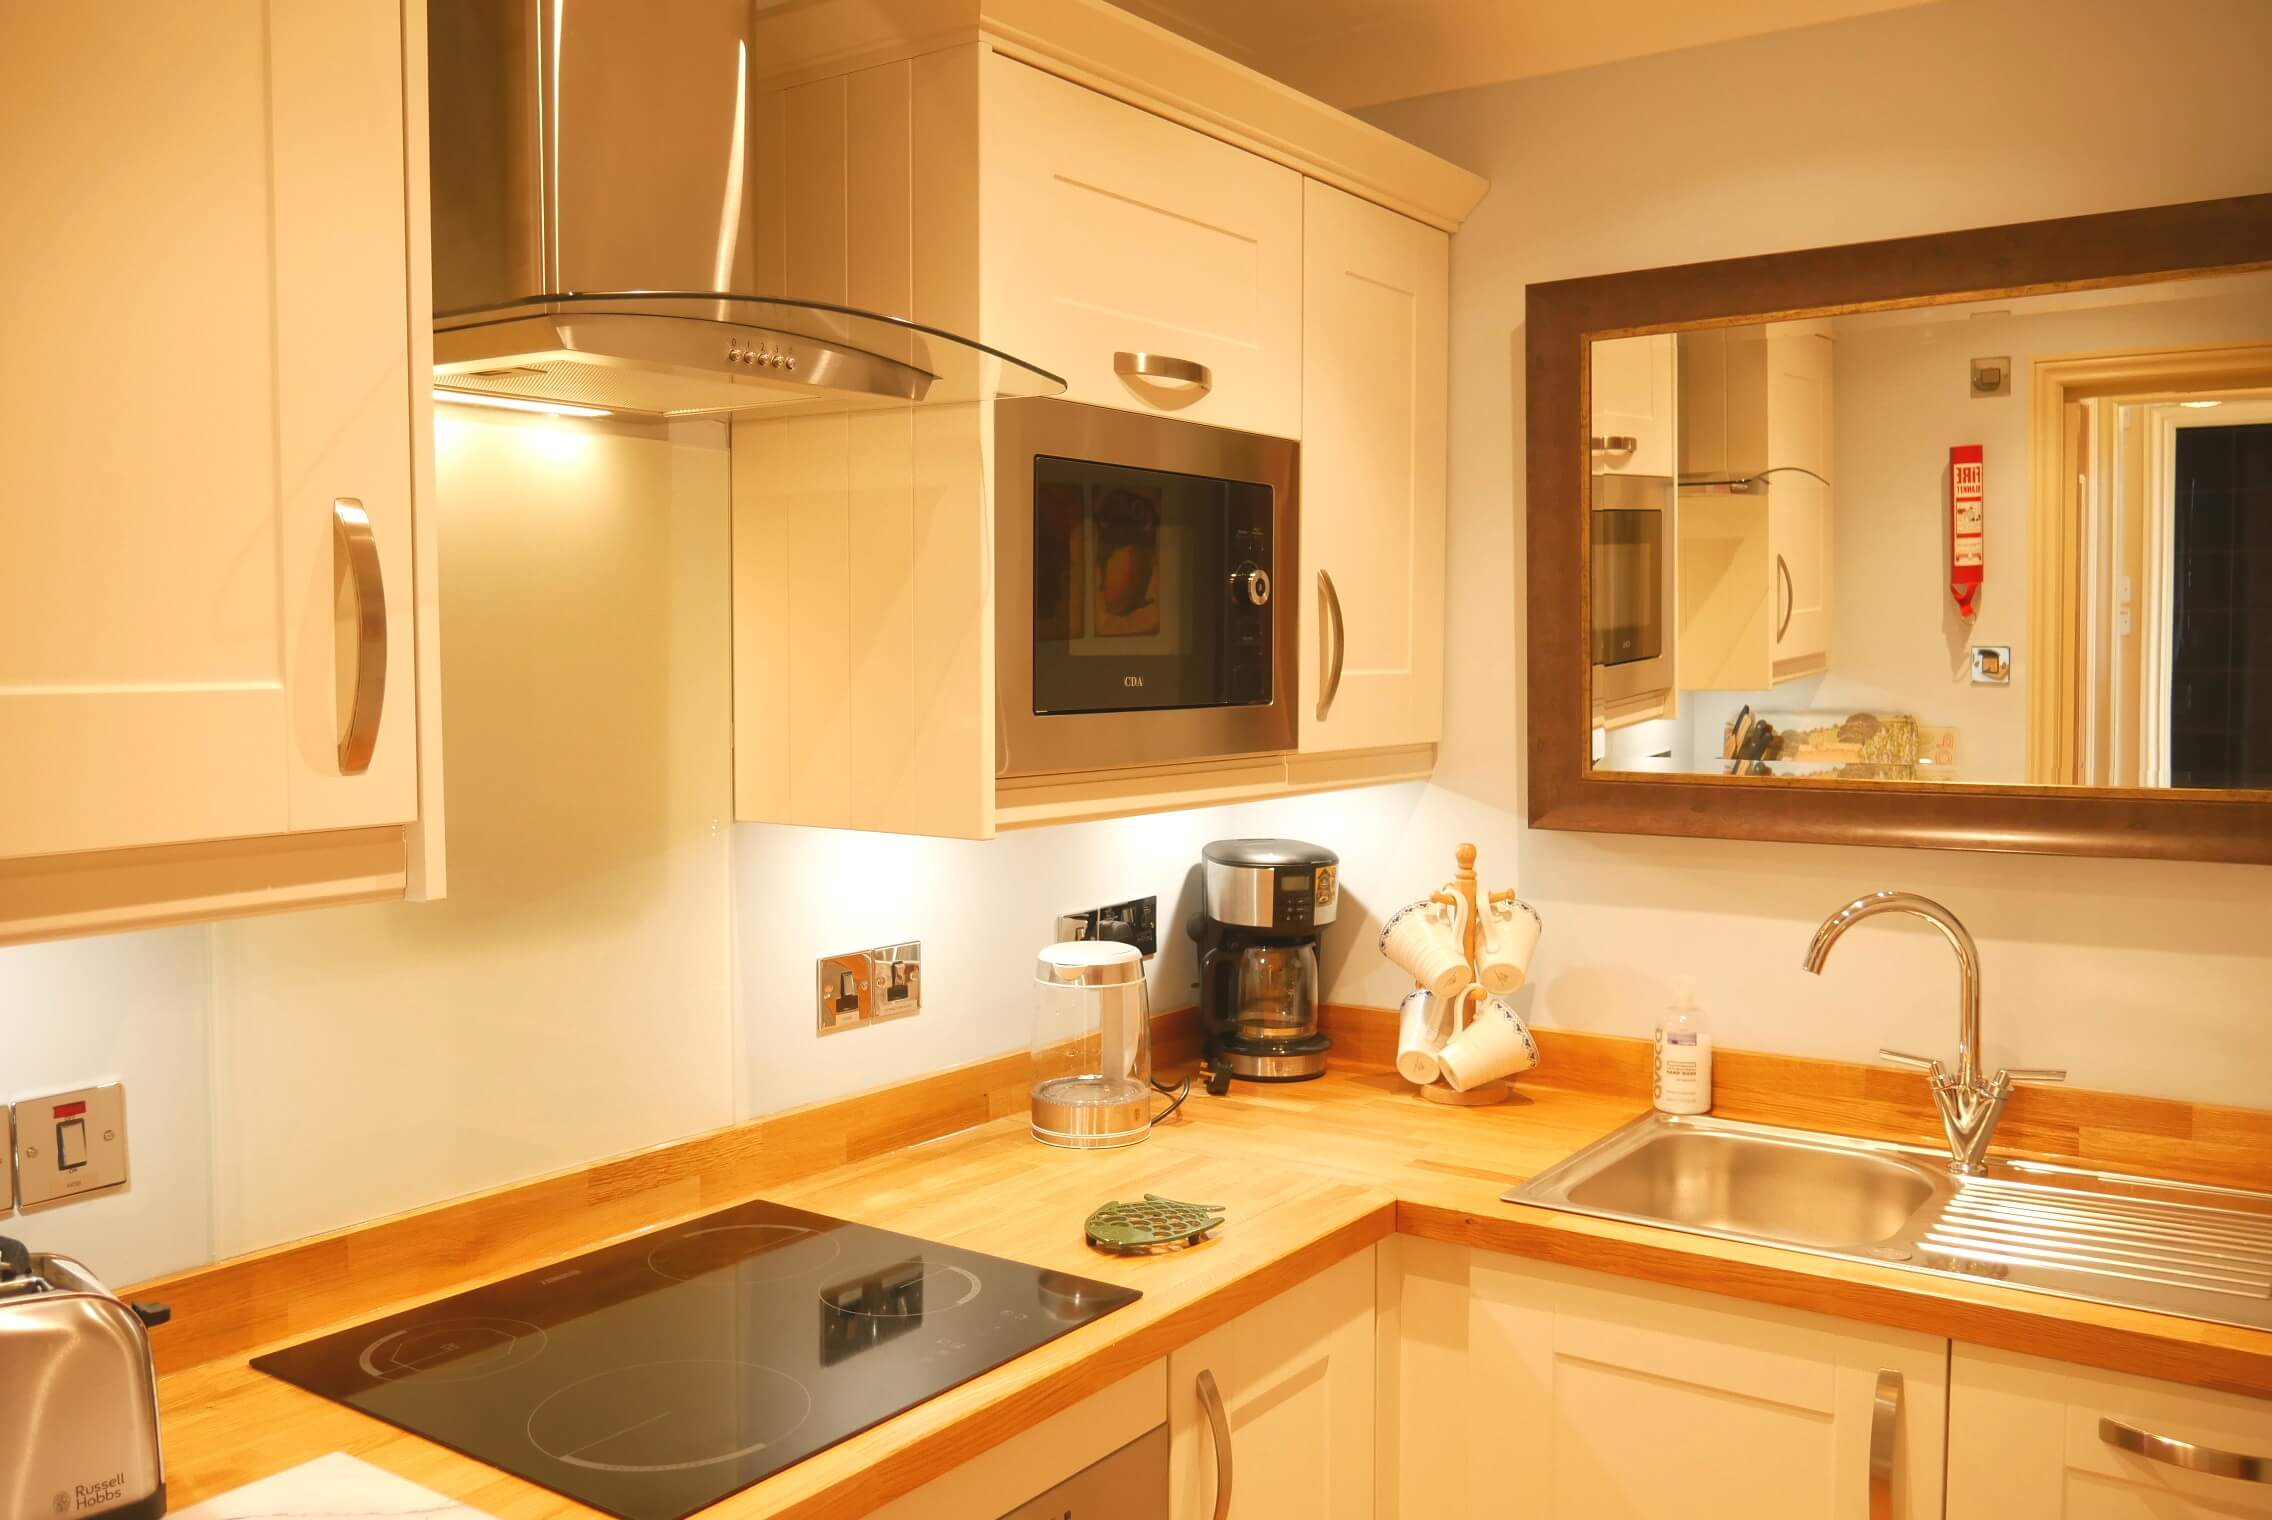 Apartment 6 - The Muntham Apartments and Town House - dog friendly self catering holiday accommodation in Torquay